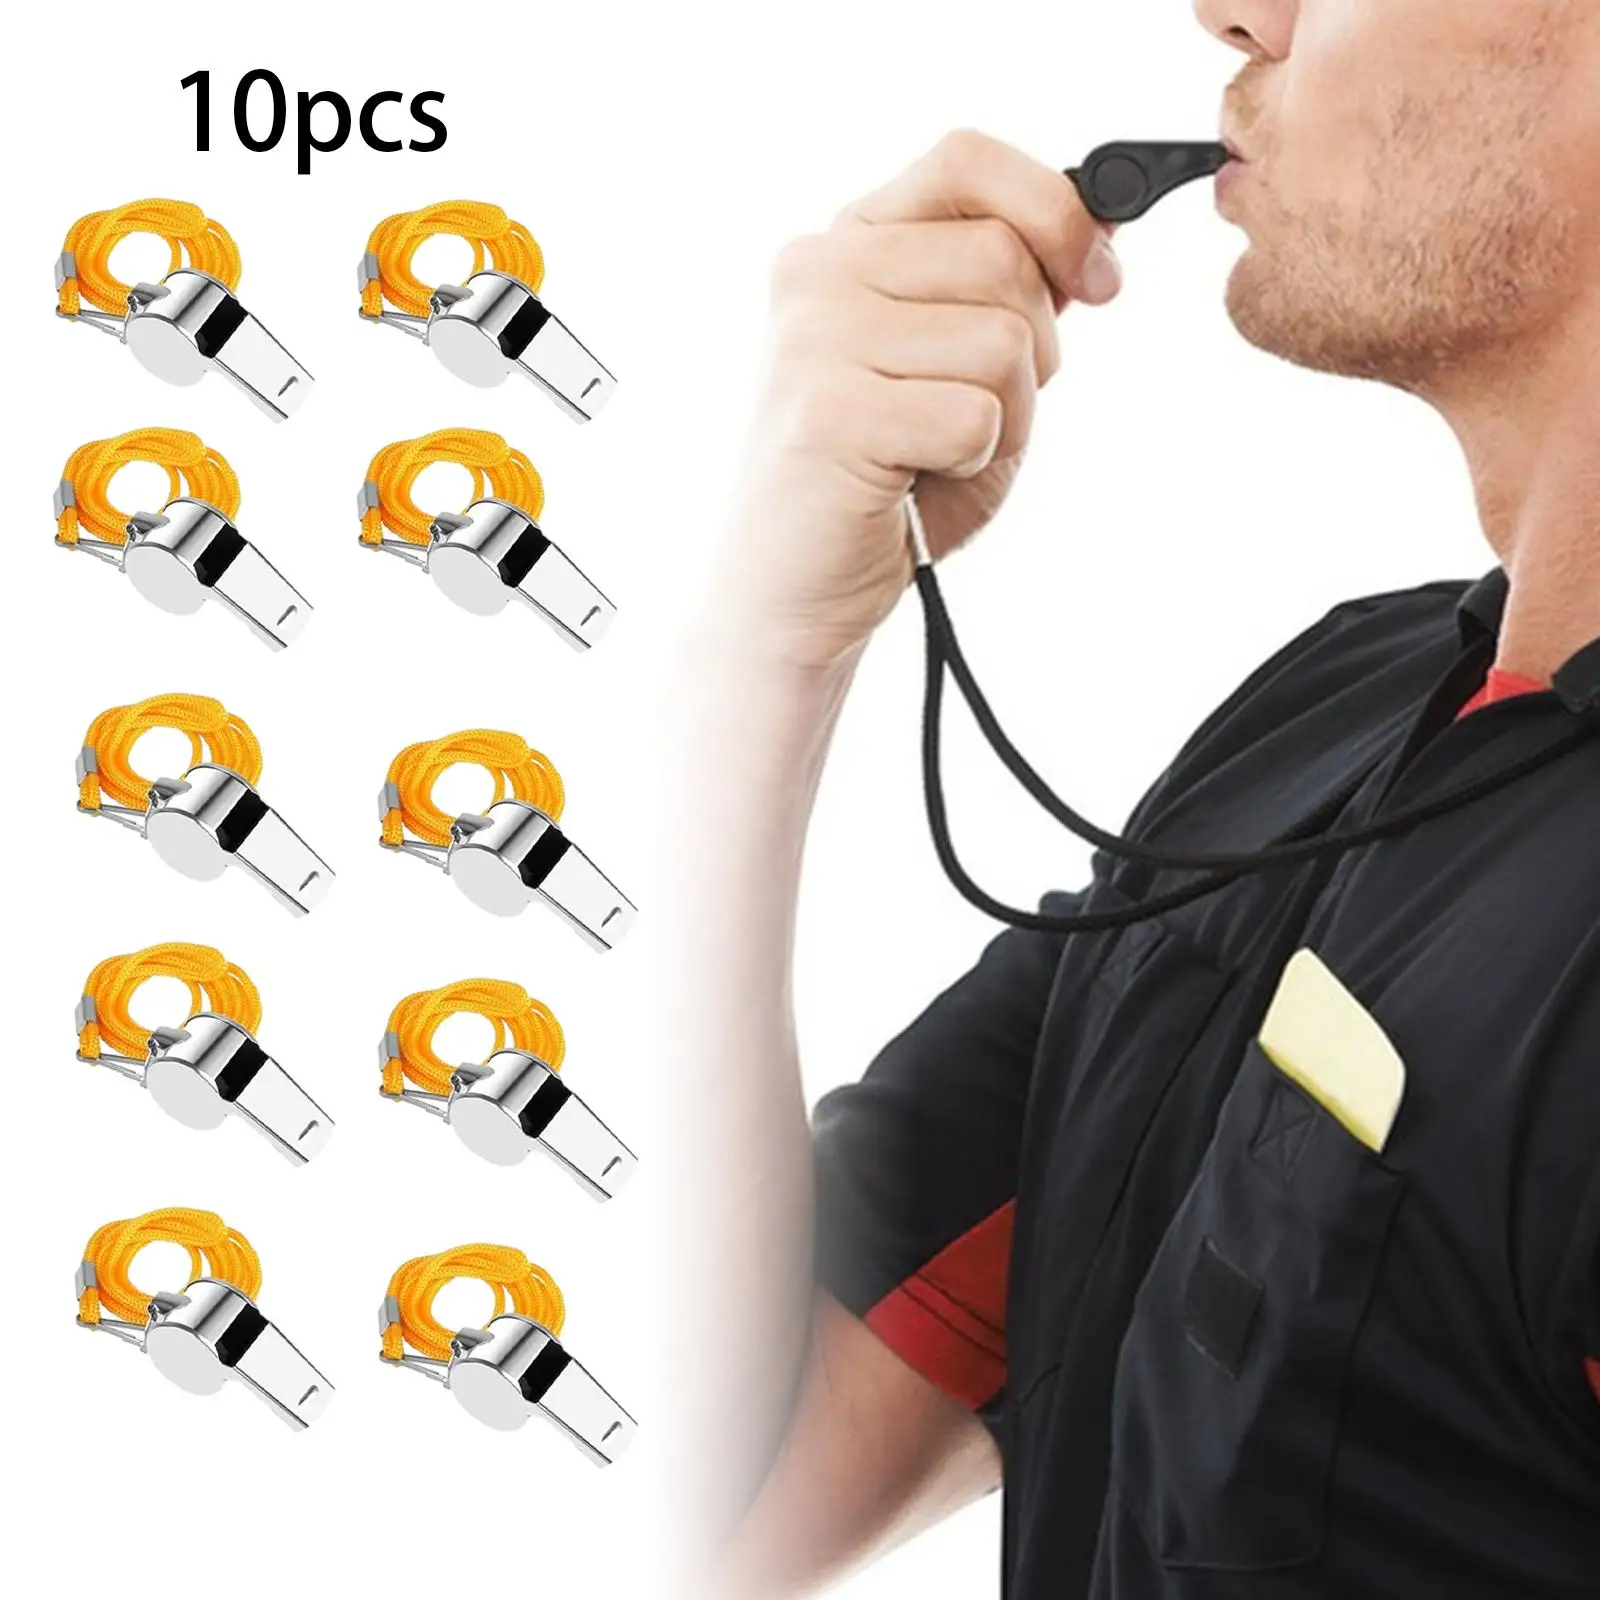 10x Sports Whistles Loud Sound Professional Referee Whistle Metal Whistle for Football Competition Soccer Basketball Training